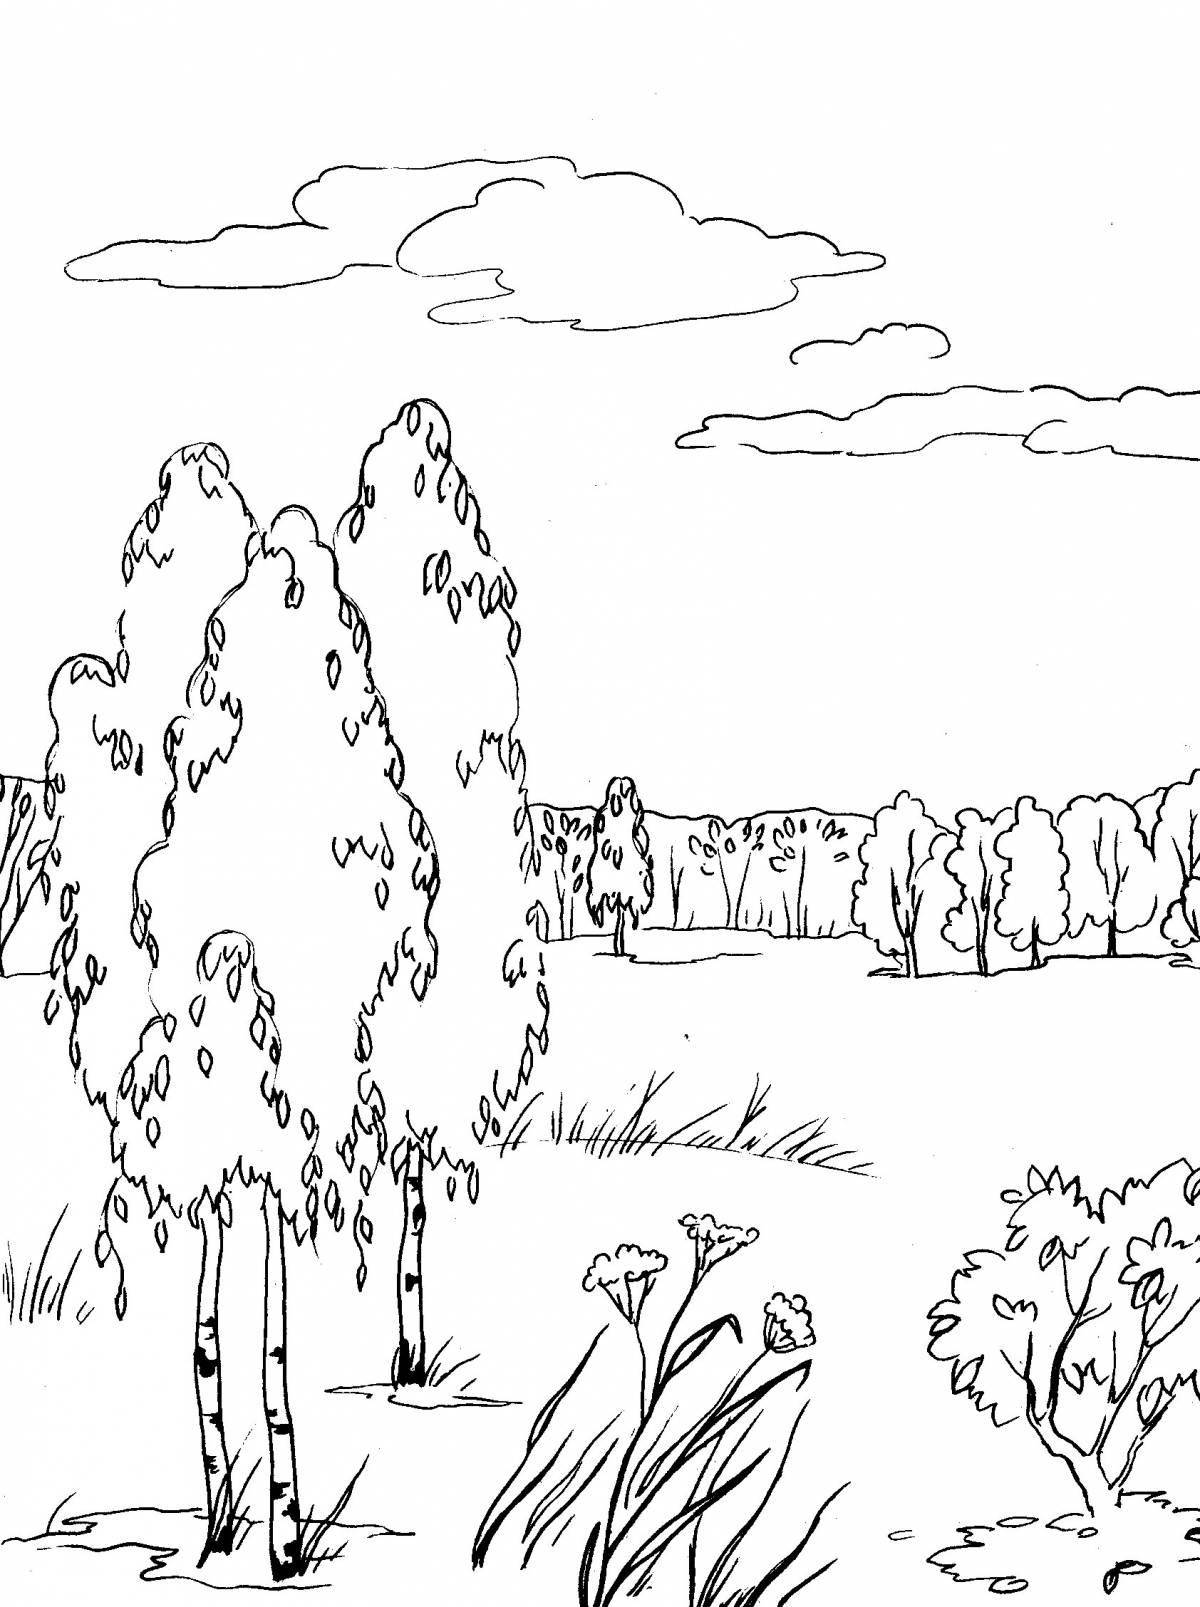 Great birch grove coloring book for kids